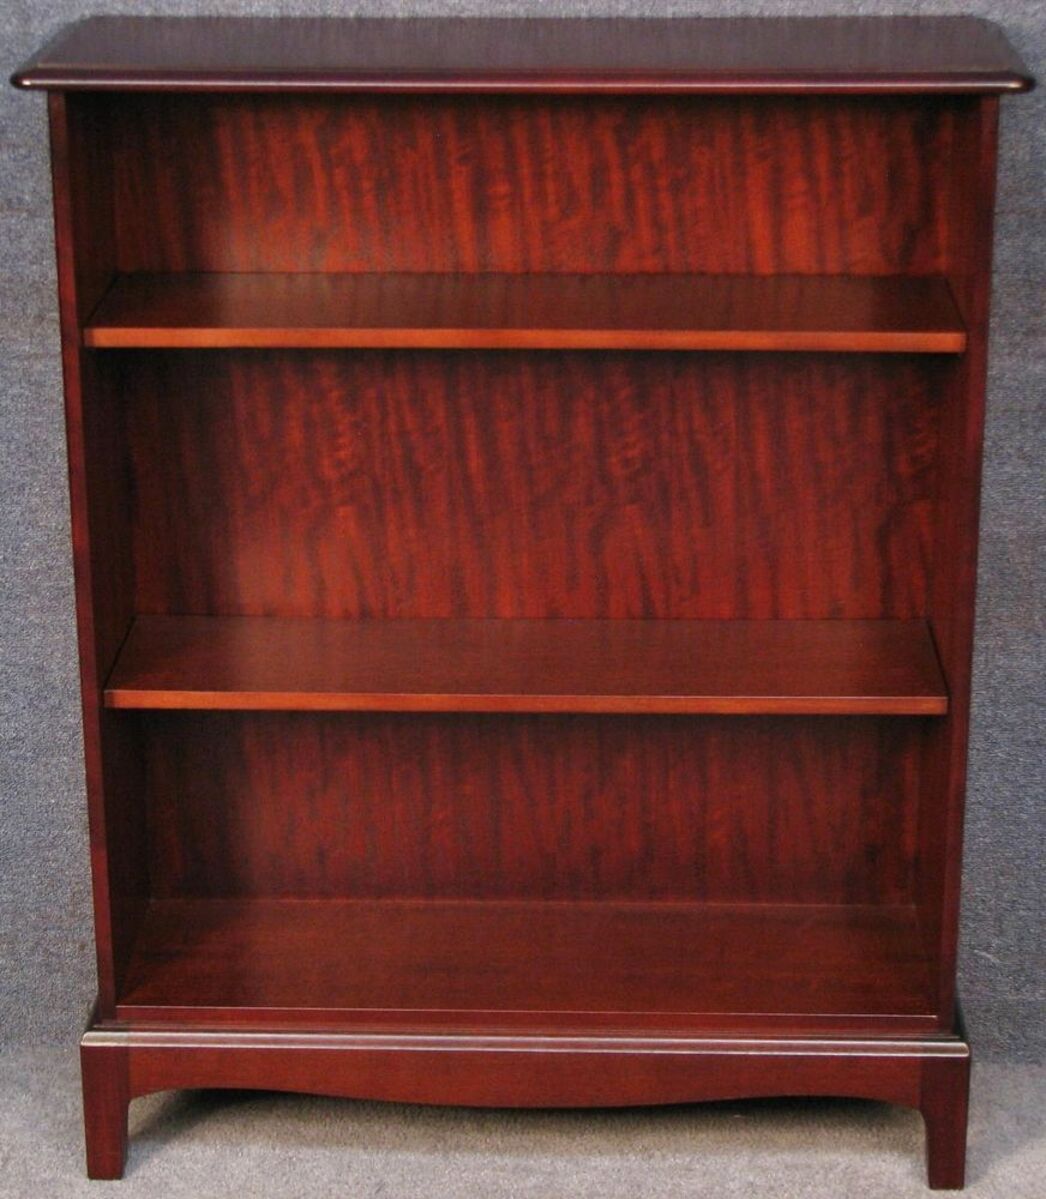 Stag Bookcase For Sale In Uk 62 Used Stag Bookcases